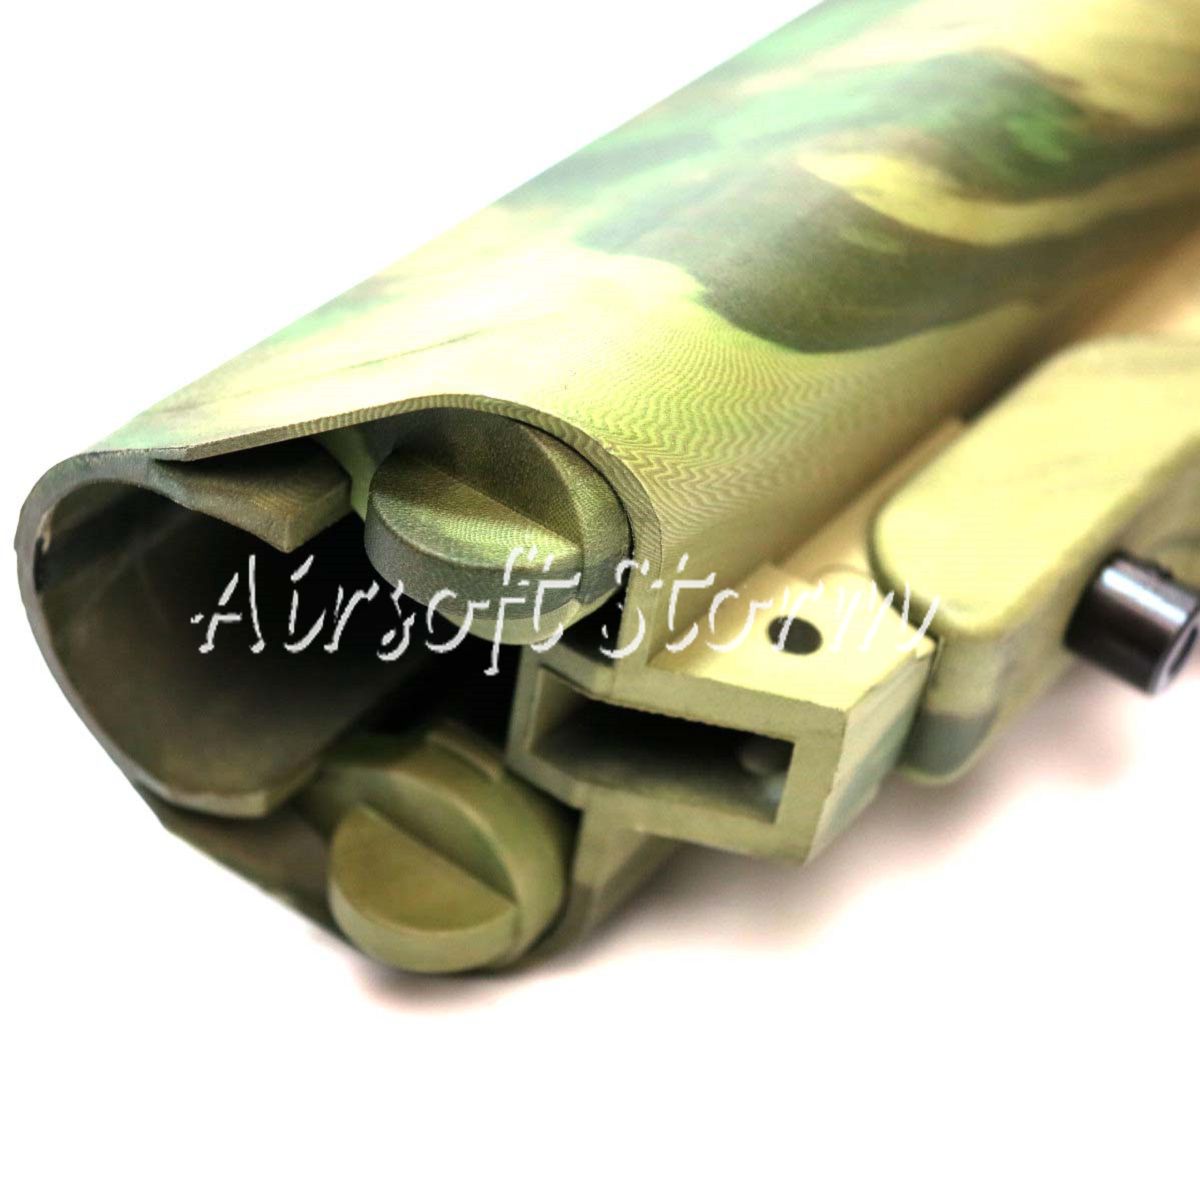 Airsoft Tactical Gear APS ASR Crane Airsoft AEG Stock With Sling Swivel A-TACS FG Camo